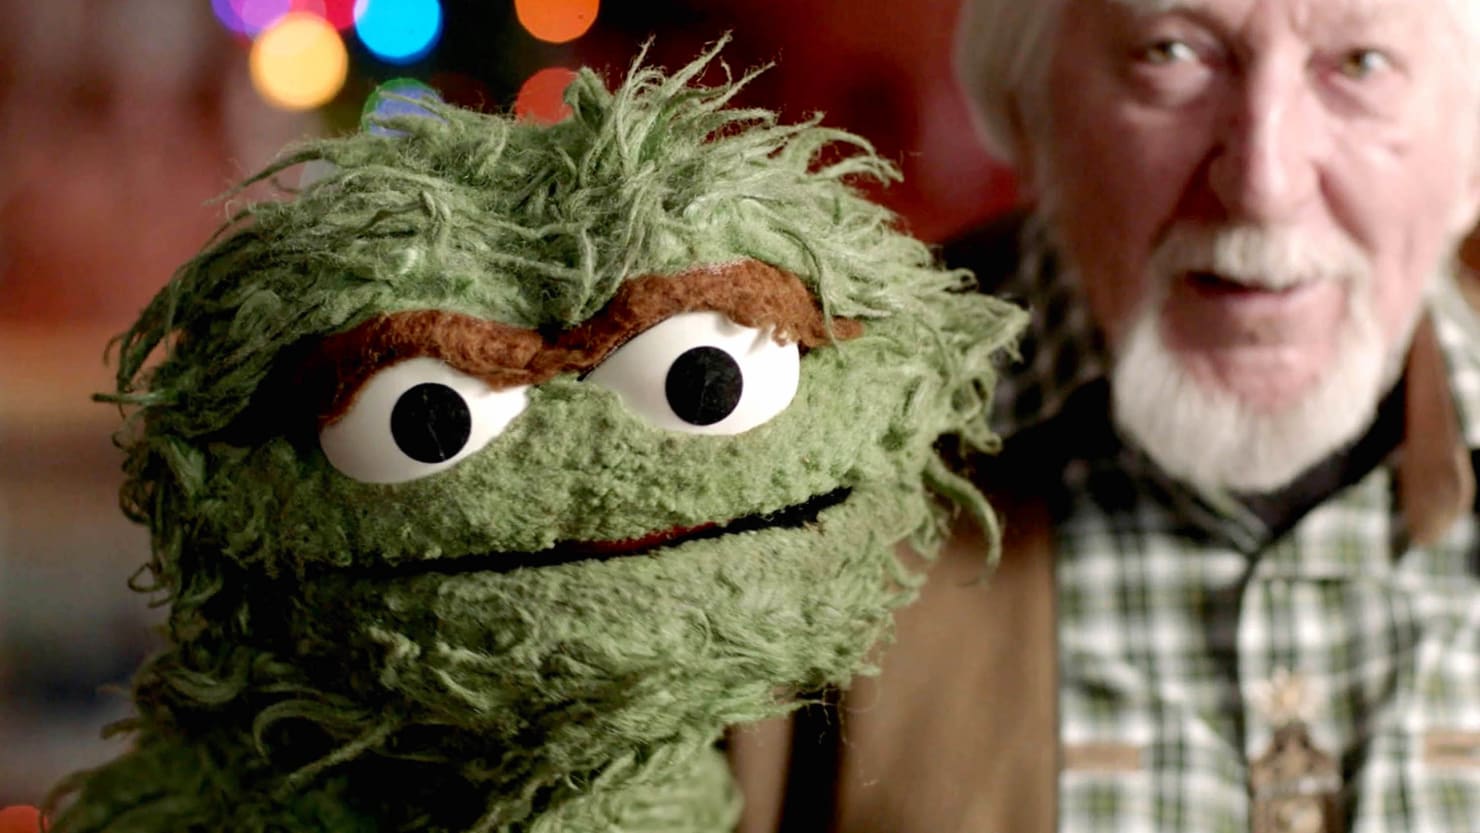 How “Sesame Street” was inspired by beer commercials